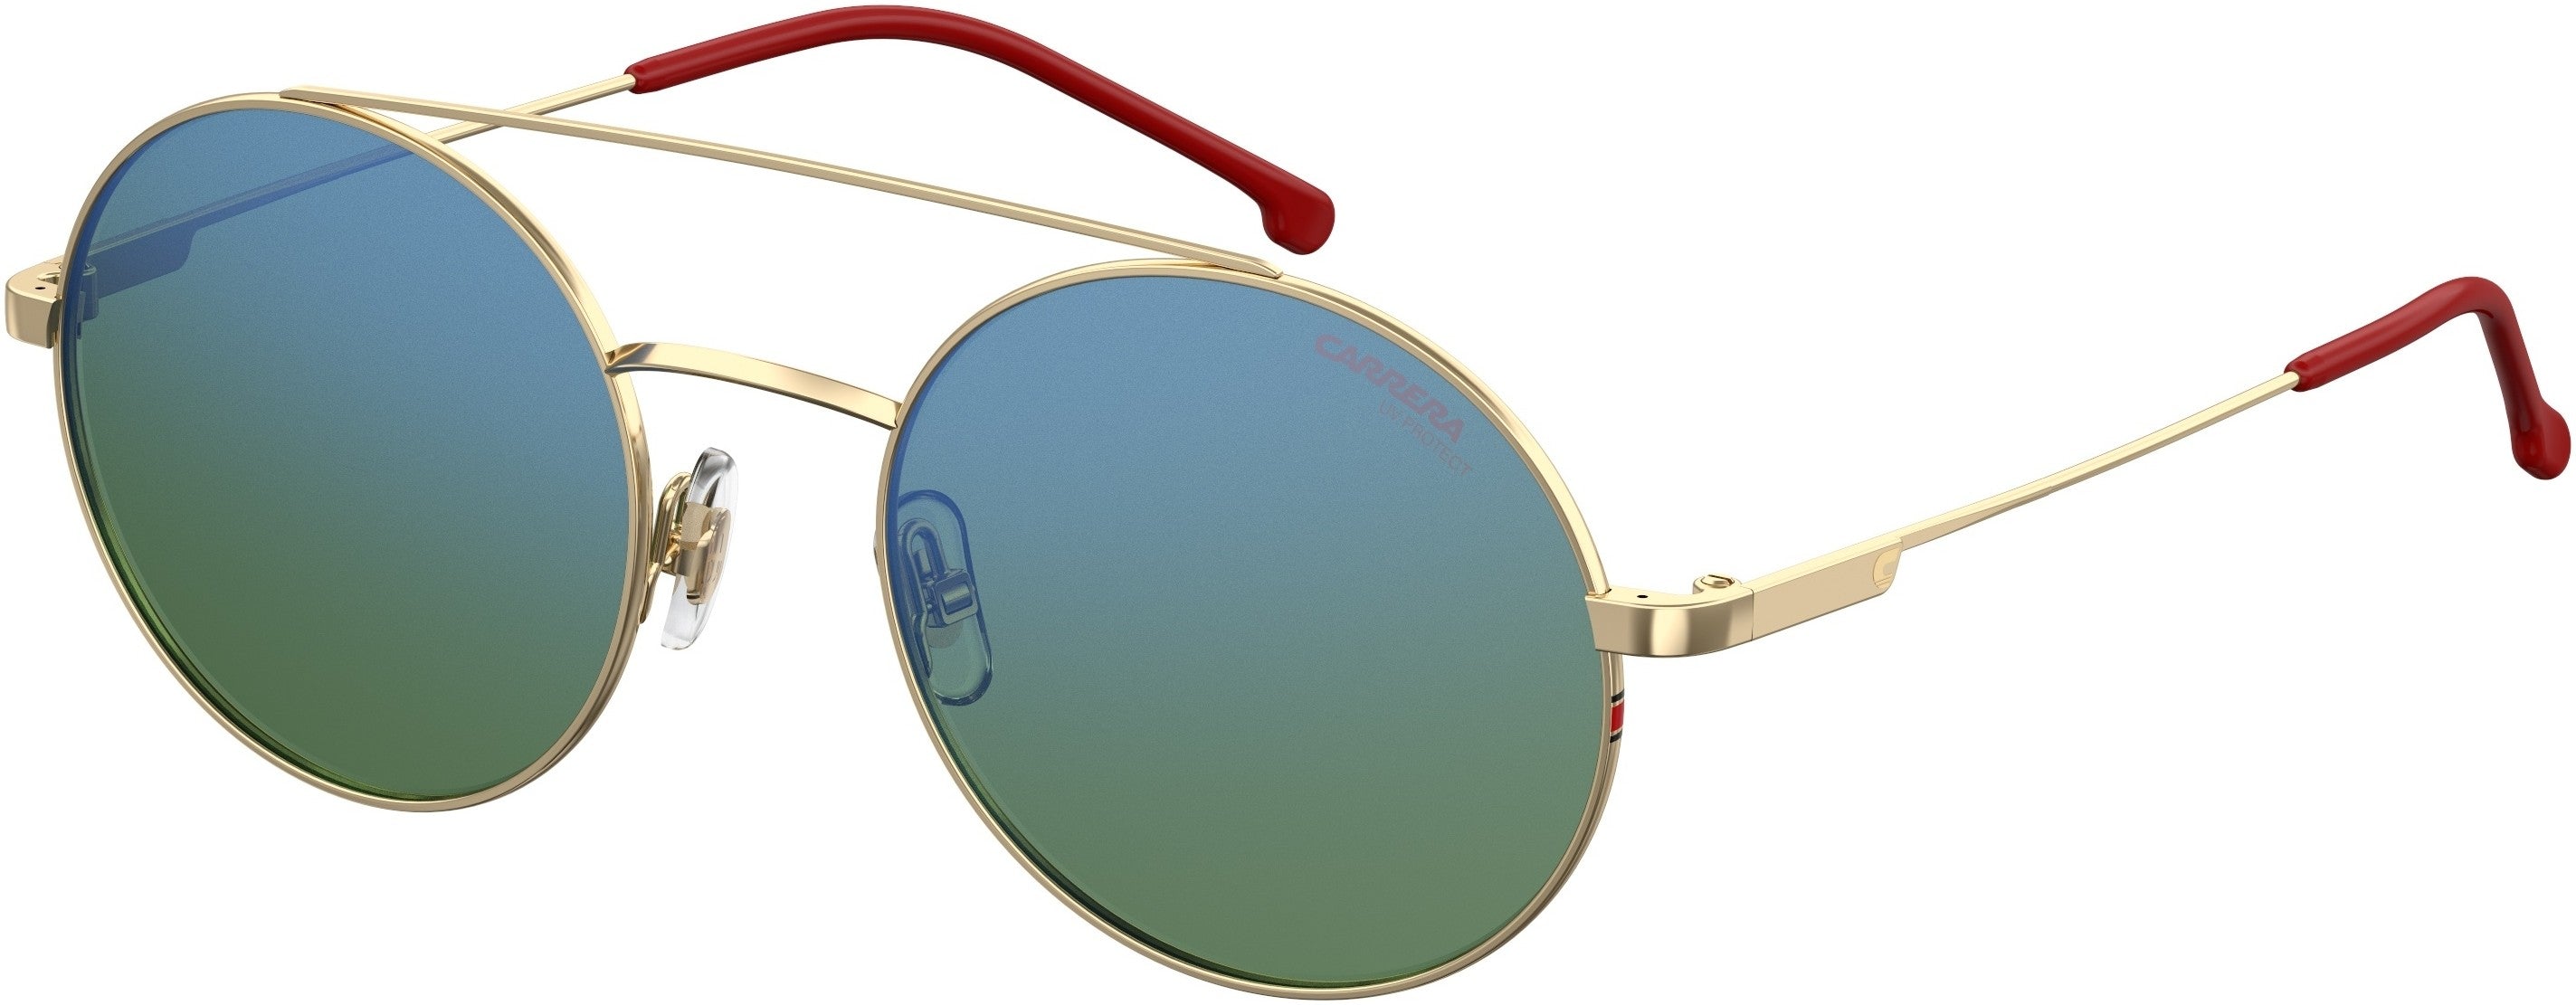  Carrera 2004T/S Oval Modified Sunglasses 0Y11-0Y11  Gold Red (HZ Green Blue Mirror)